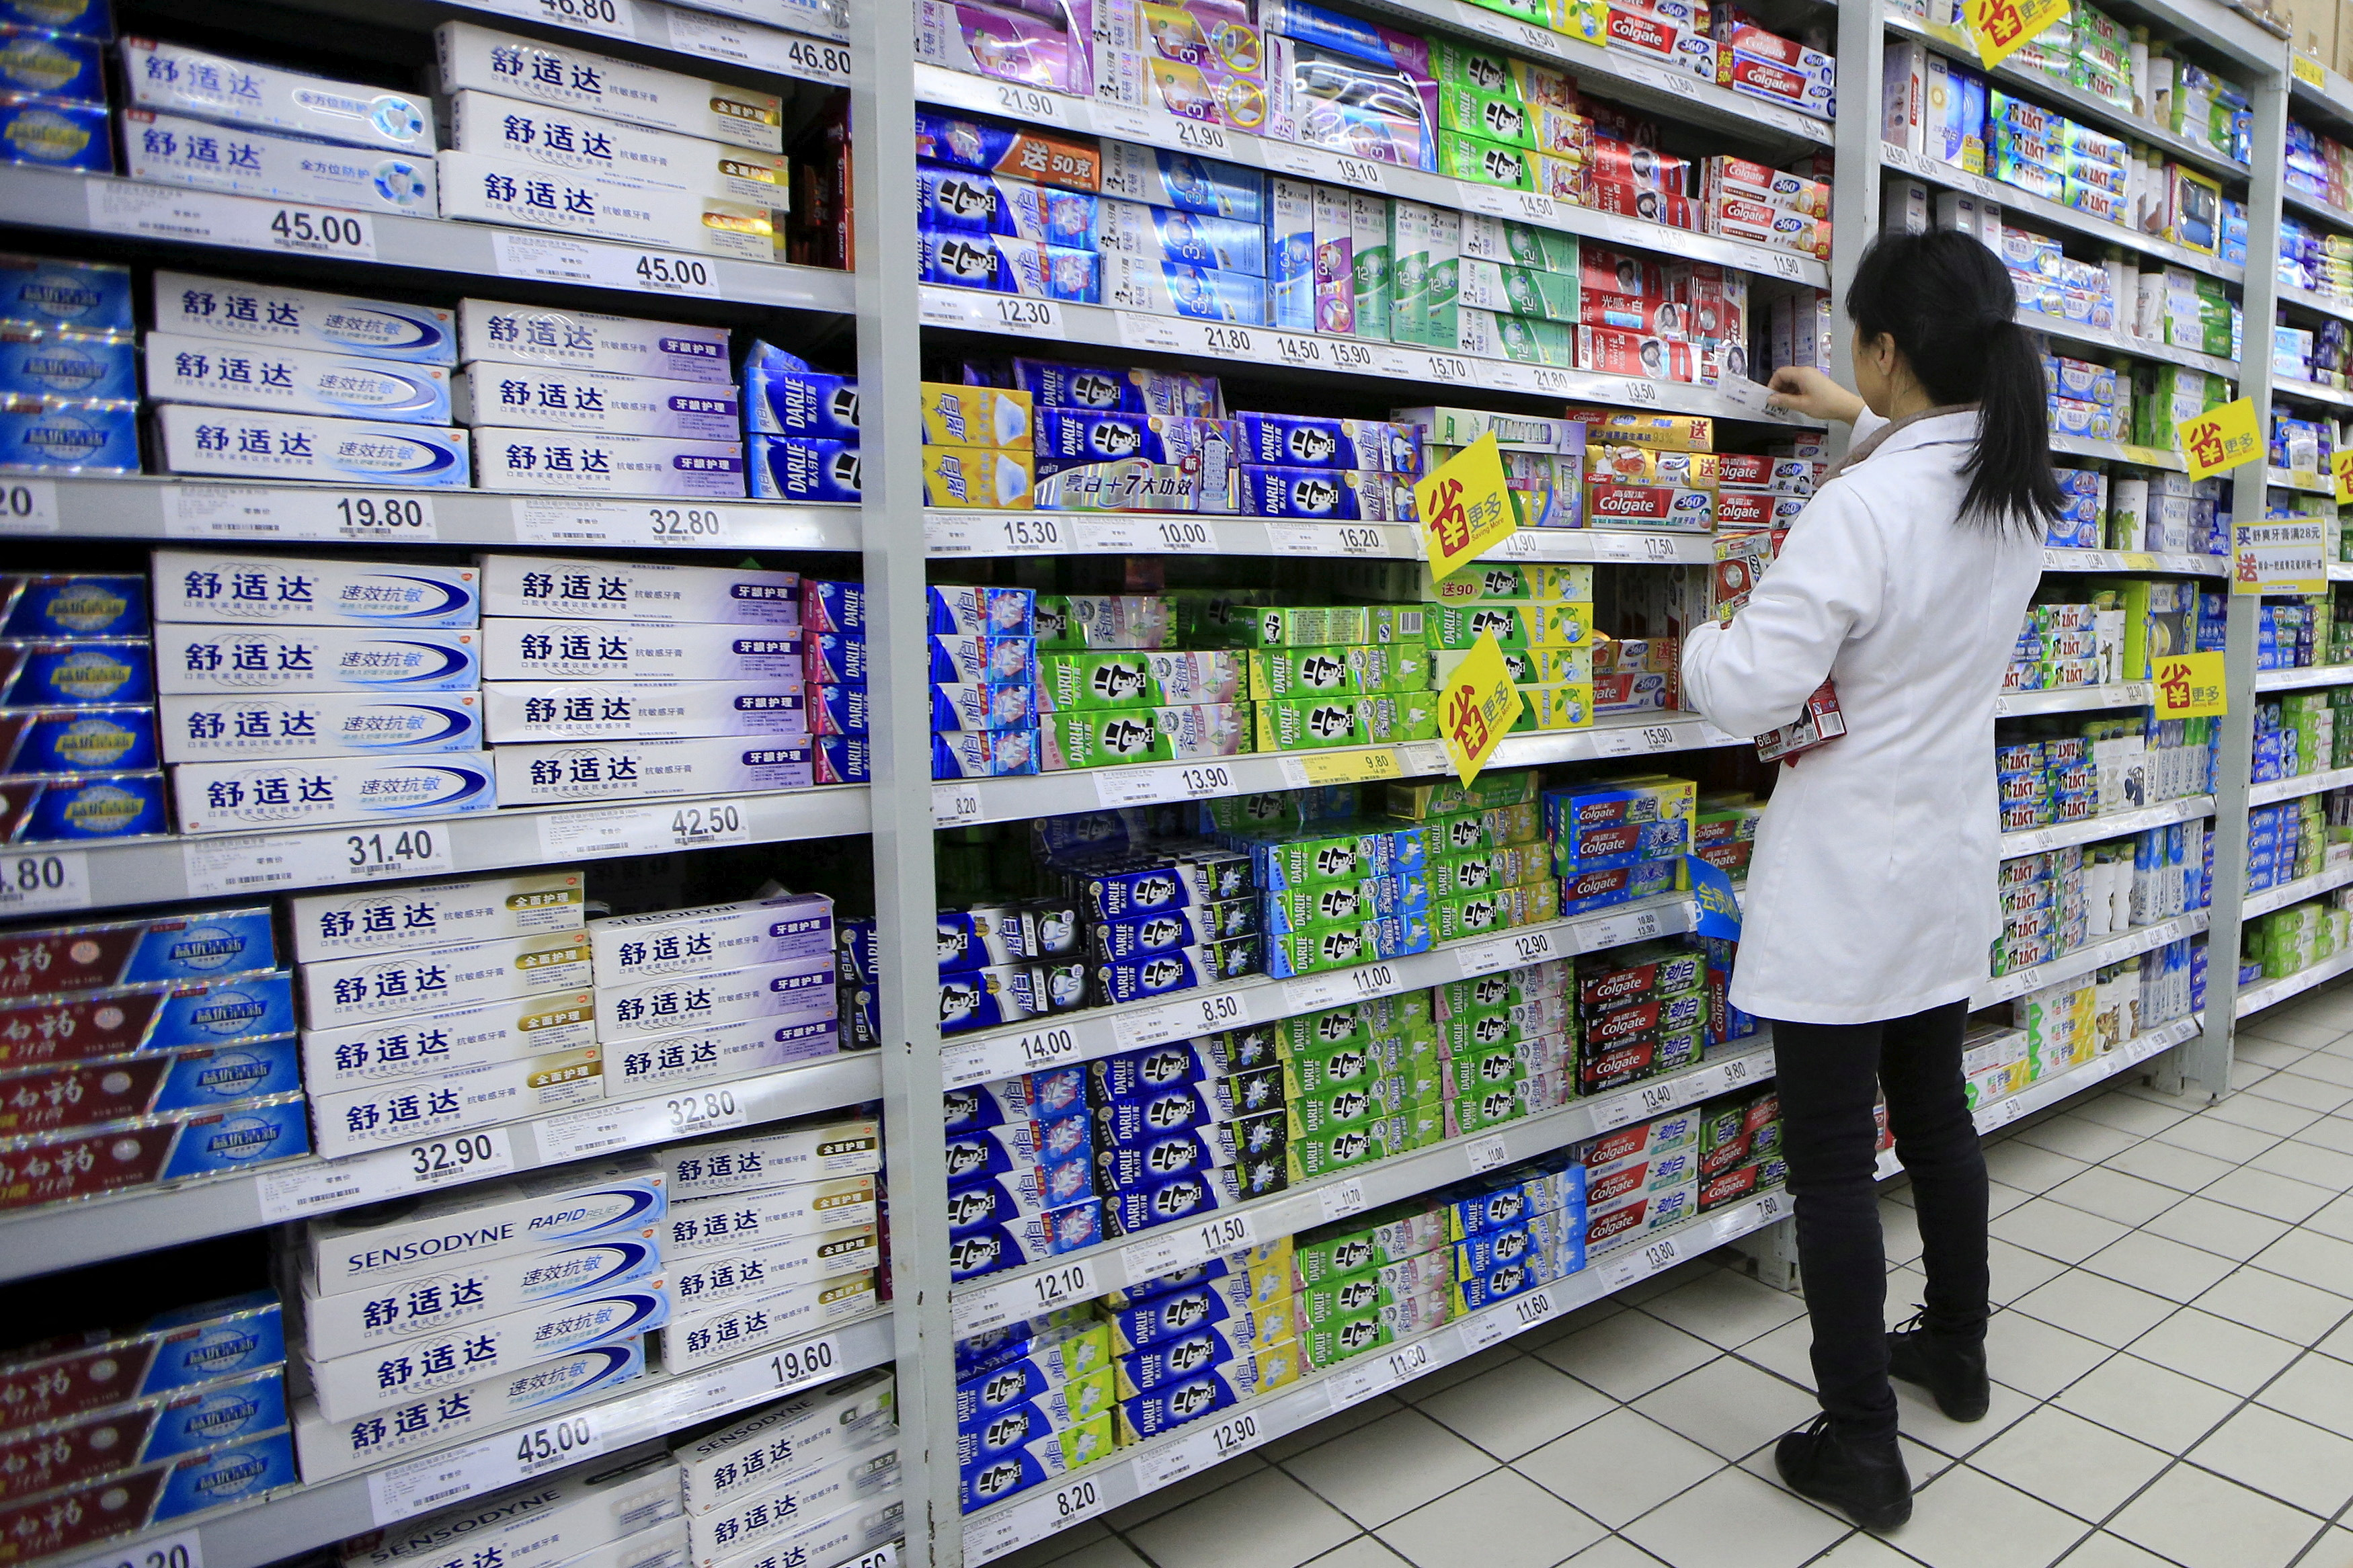 A salesperson arranges toothpaste products on a shelf at a supermarket in Shanghai